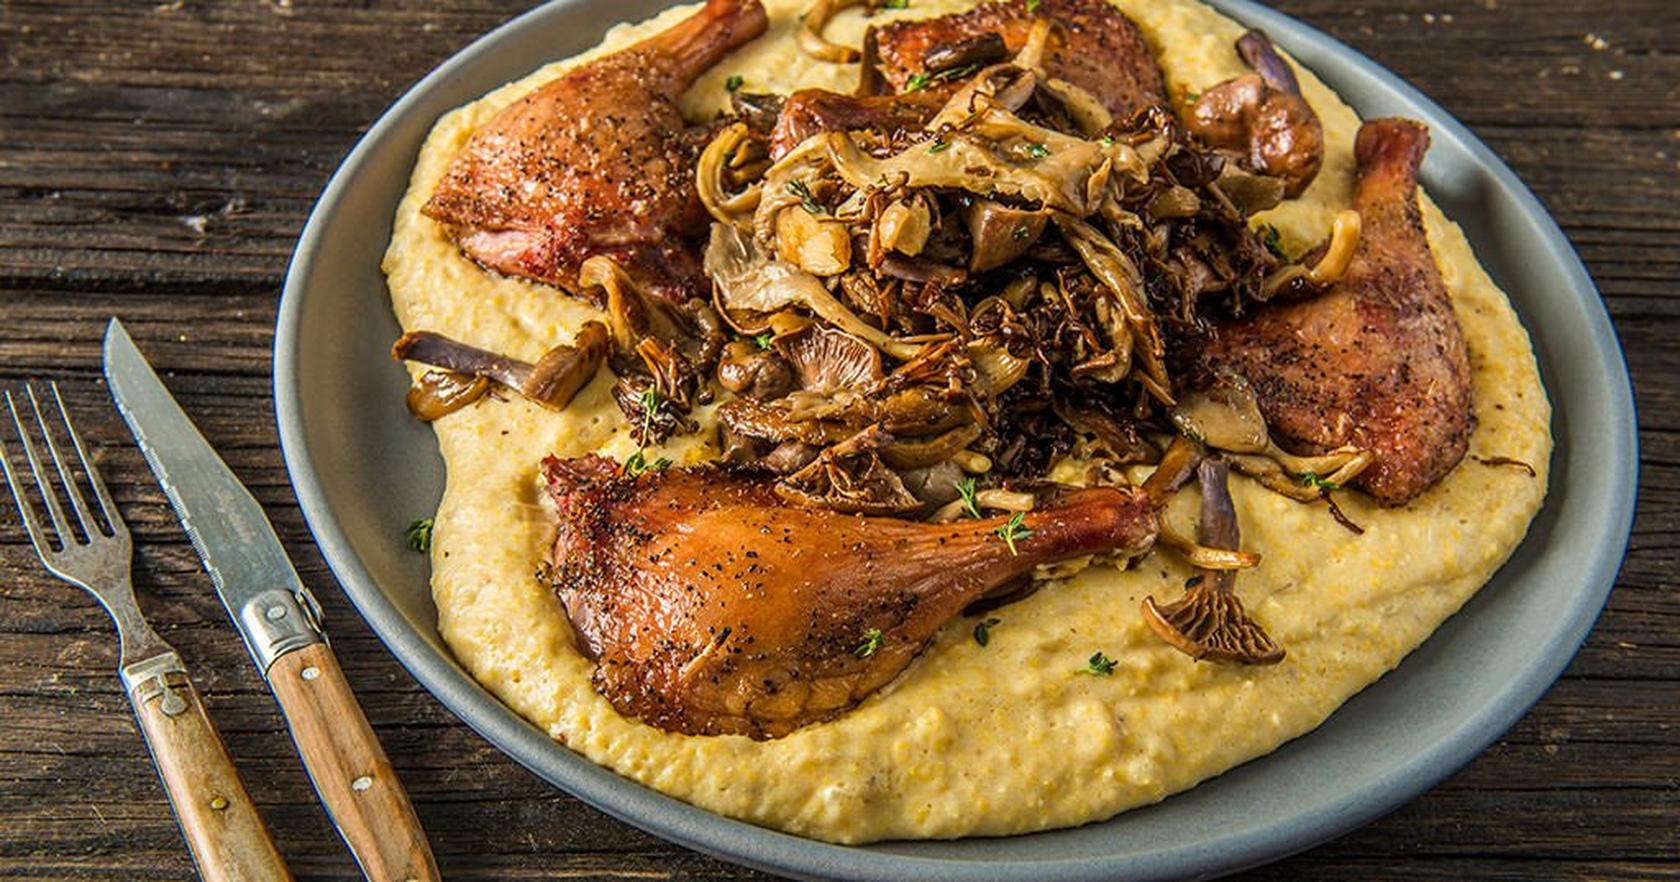 Smoked Duck Legs With Polenta And Wild Mushrooms